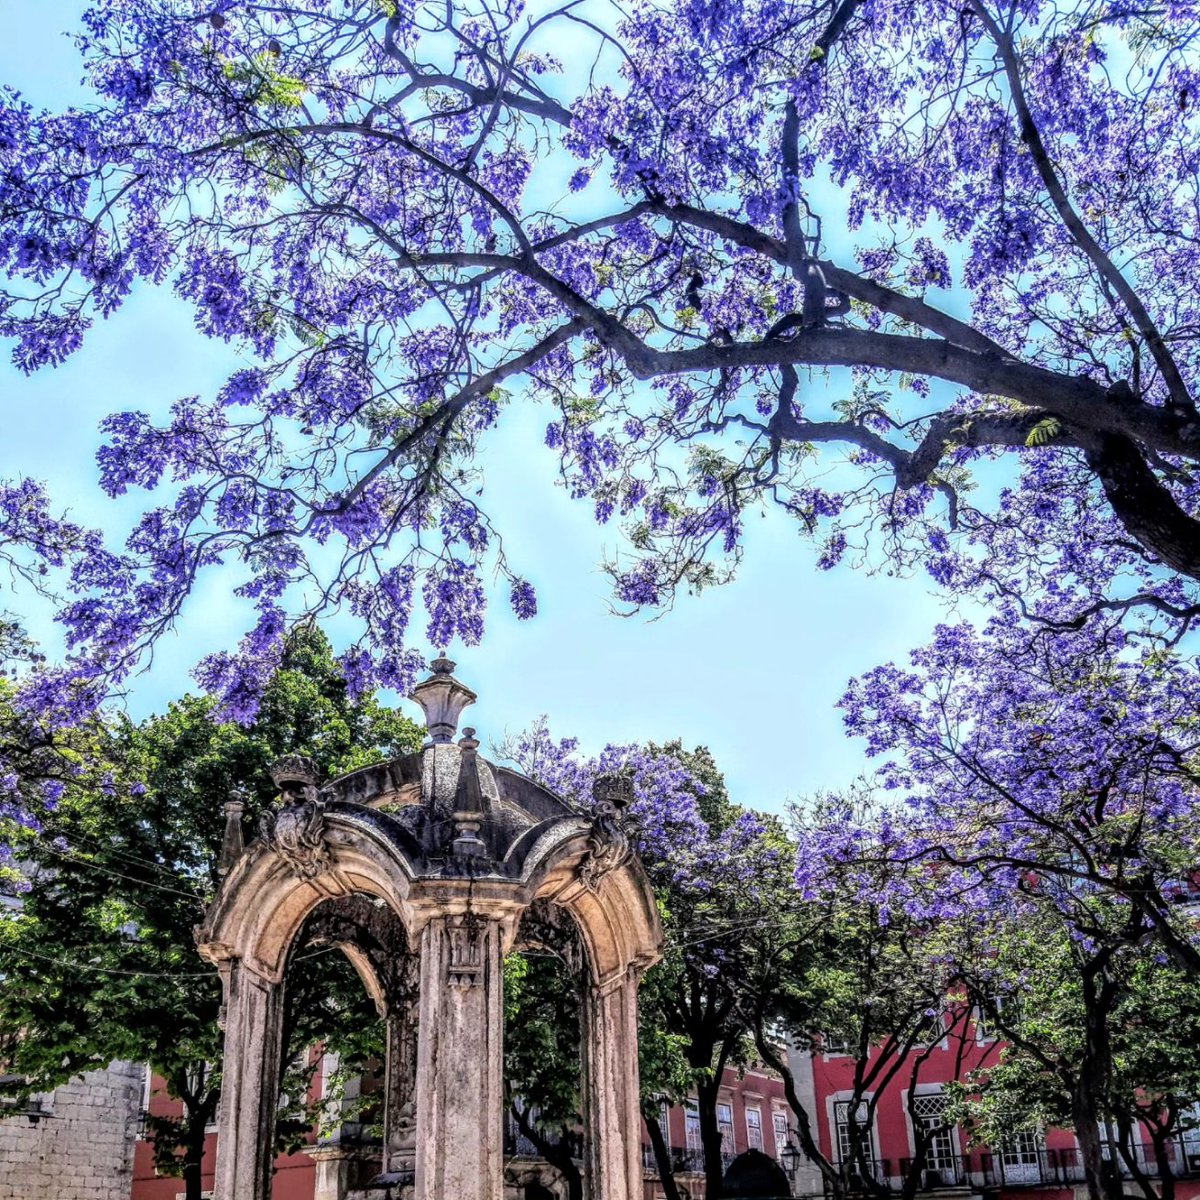 👉 Summer is coming
Being one of Lisbon’s most emblematic trees, the jacarandas cover the city with their electric purple flowers in May and June, announcing the Summer! 

#JacarandaSeason #LisboninBlossom #Lisbon #Portugal #PrivateTour #LisbonTailoredTours #LisbonwithPats